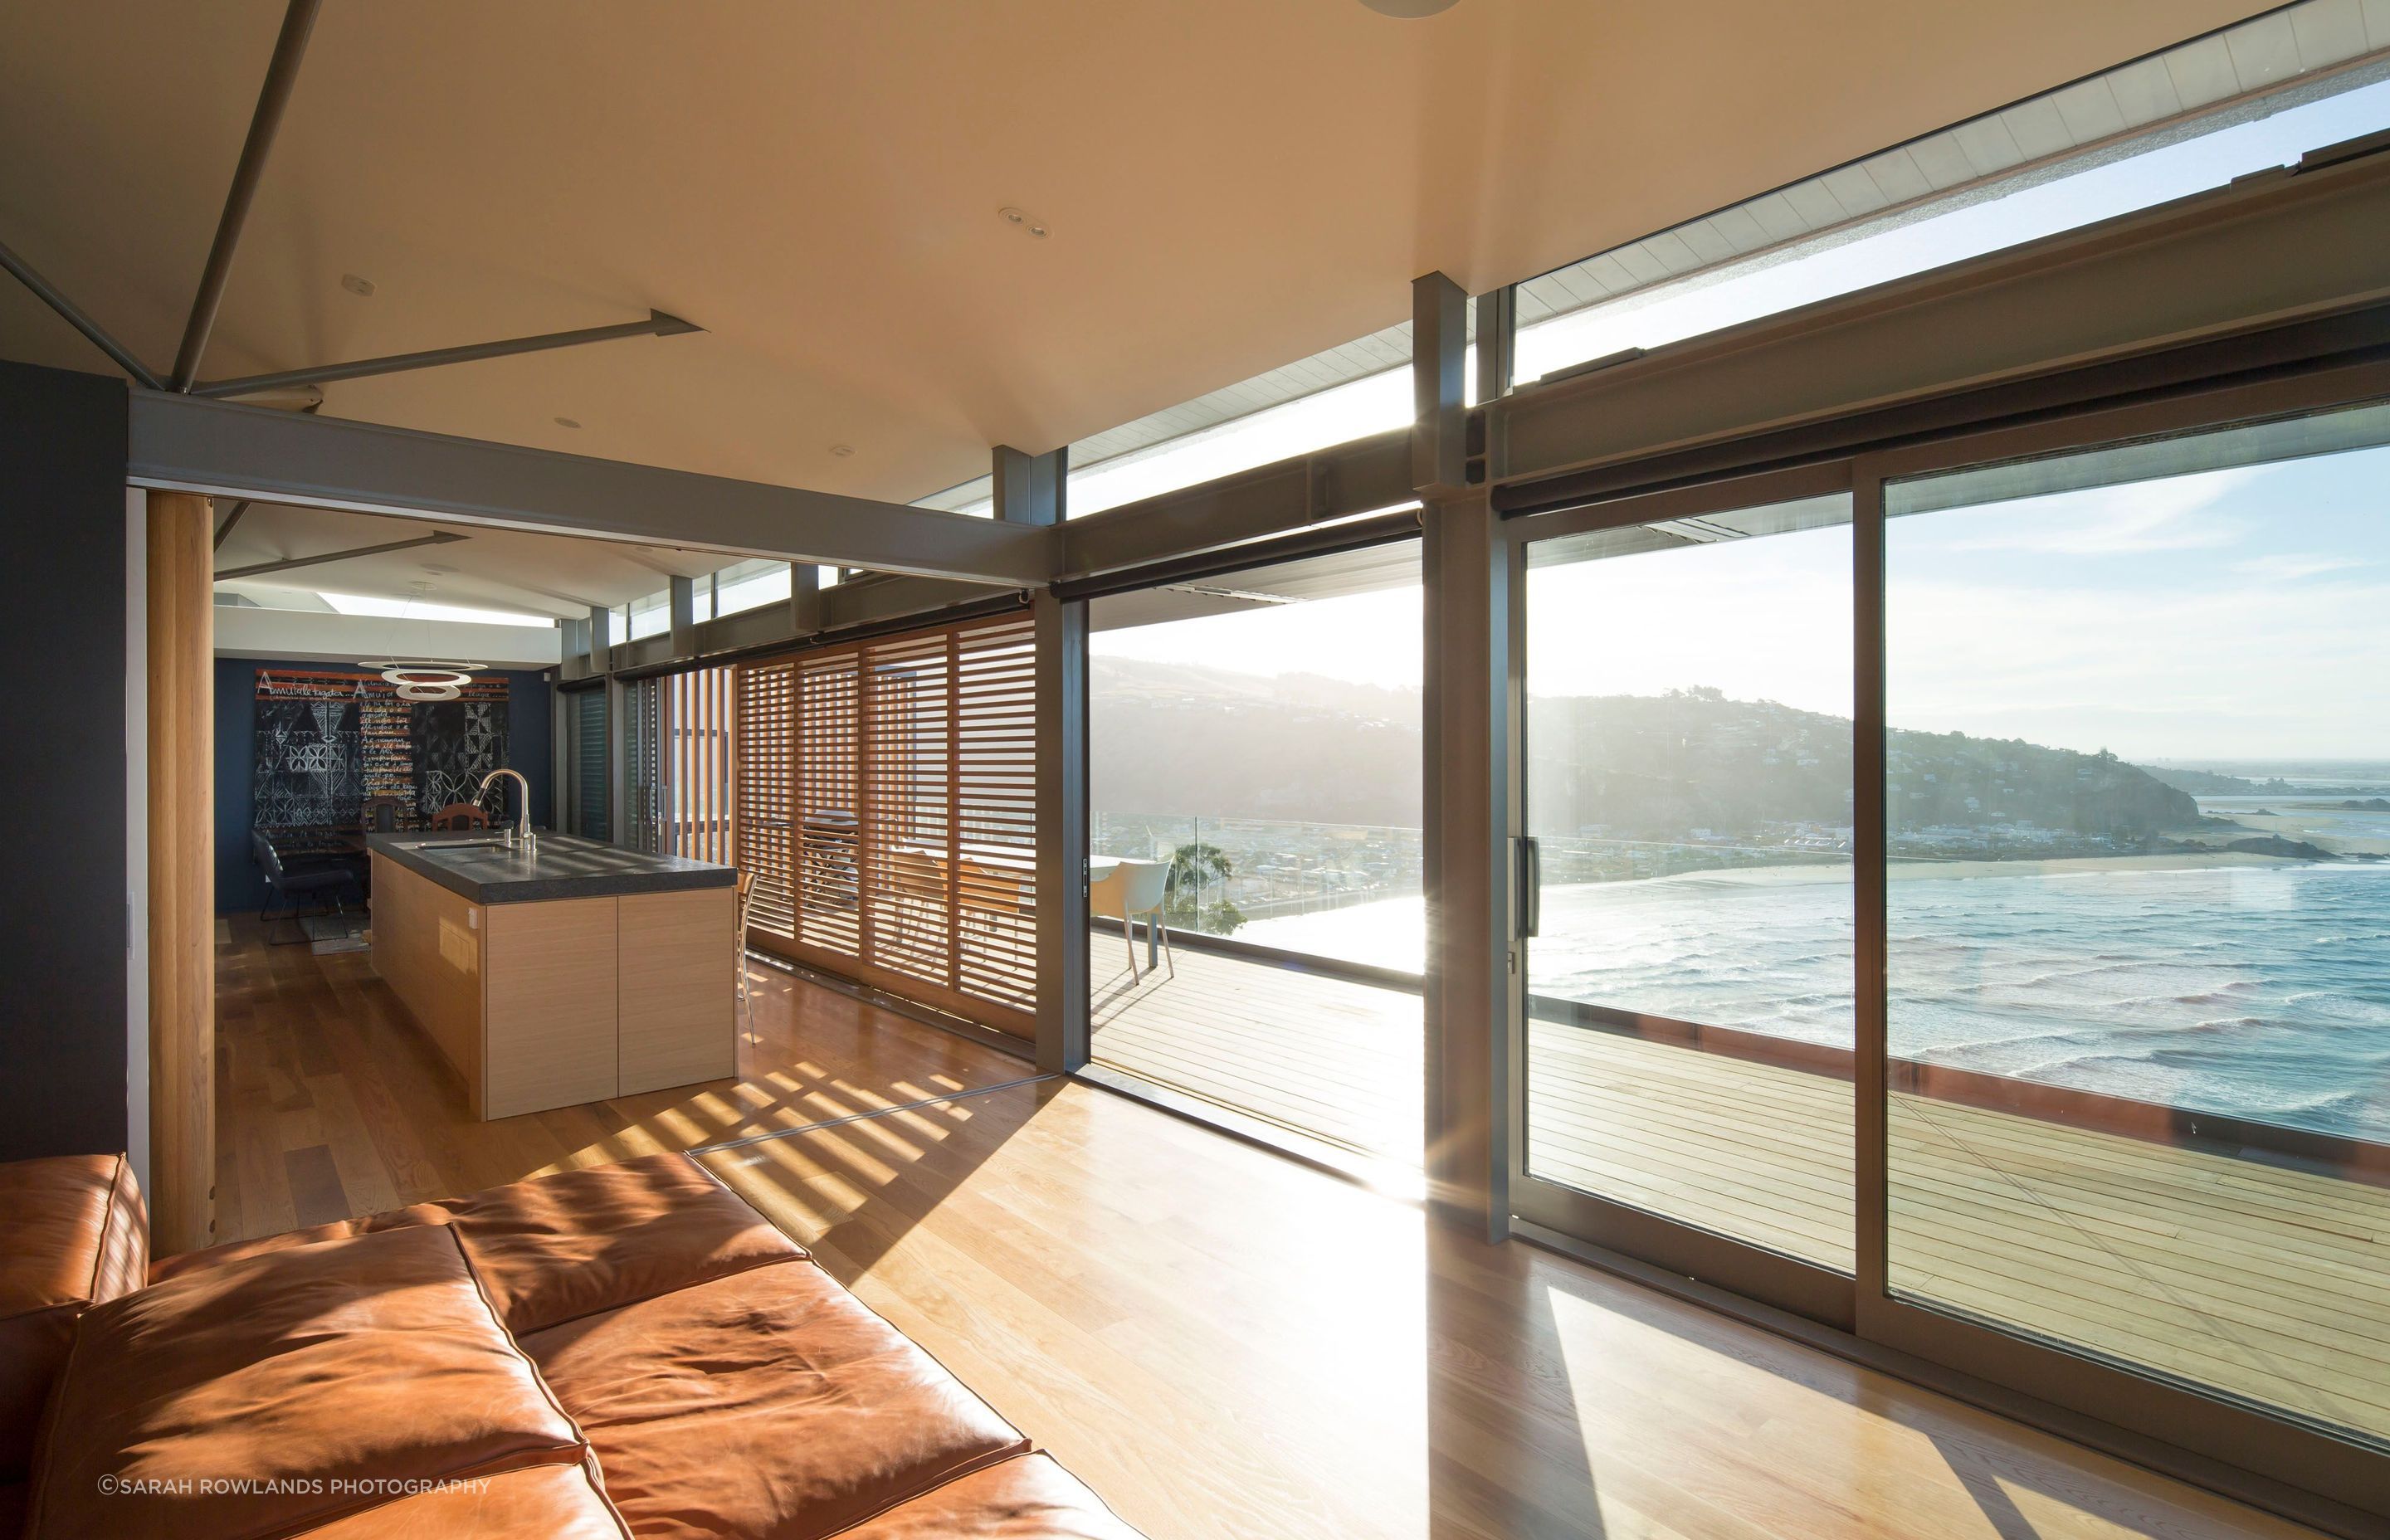 The western deck, with sliding shutters, enjoys 180-degree views from Sumner Beach through Pegasus Bay and out to the Pacific Ocean.